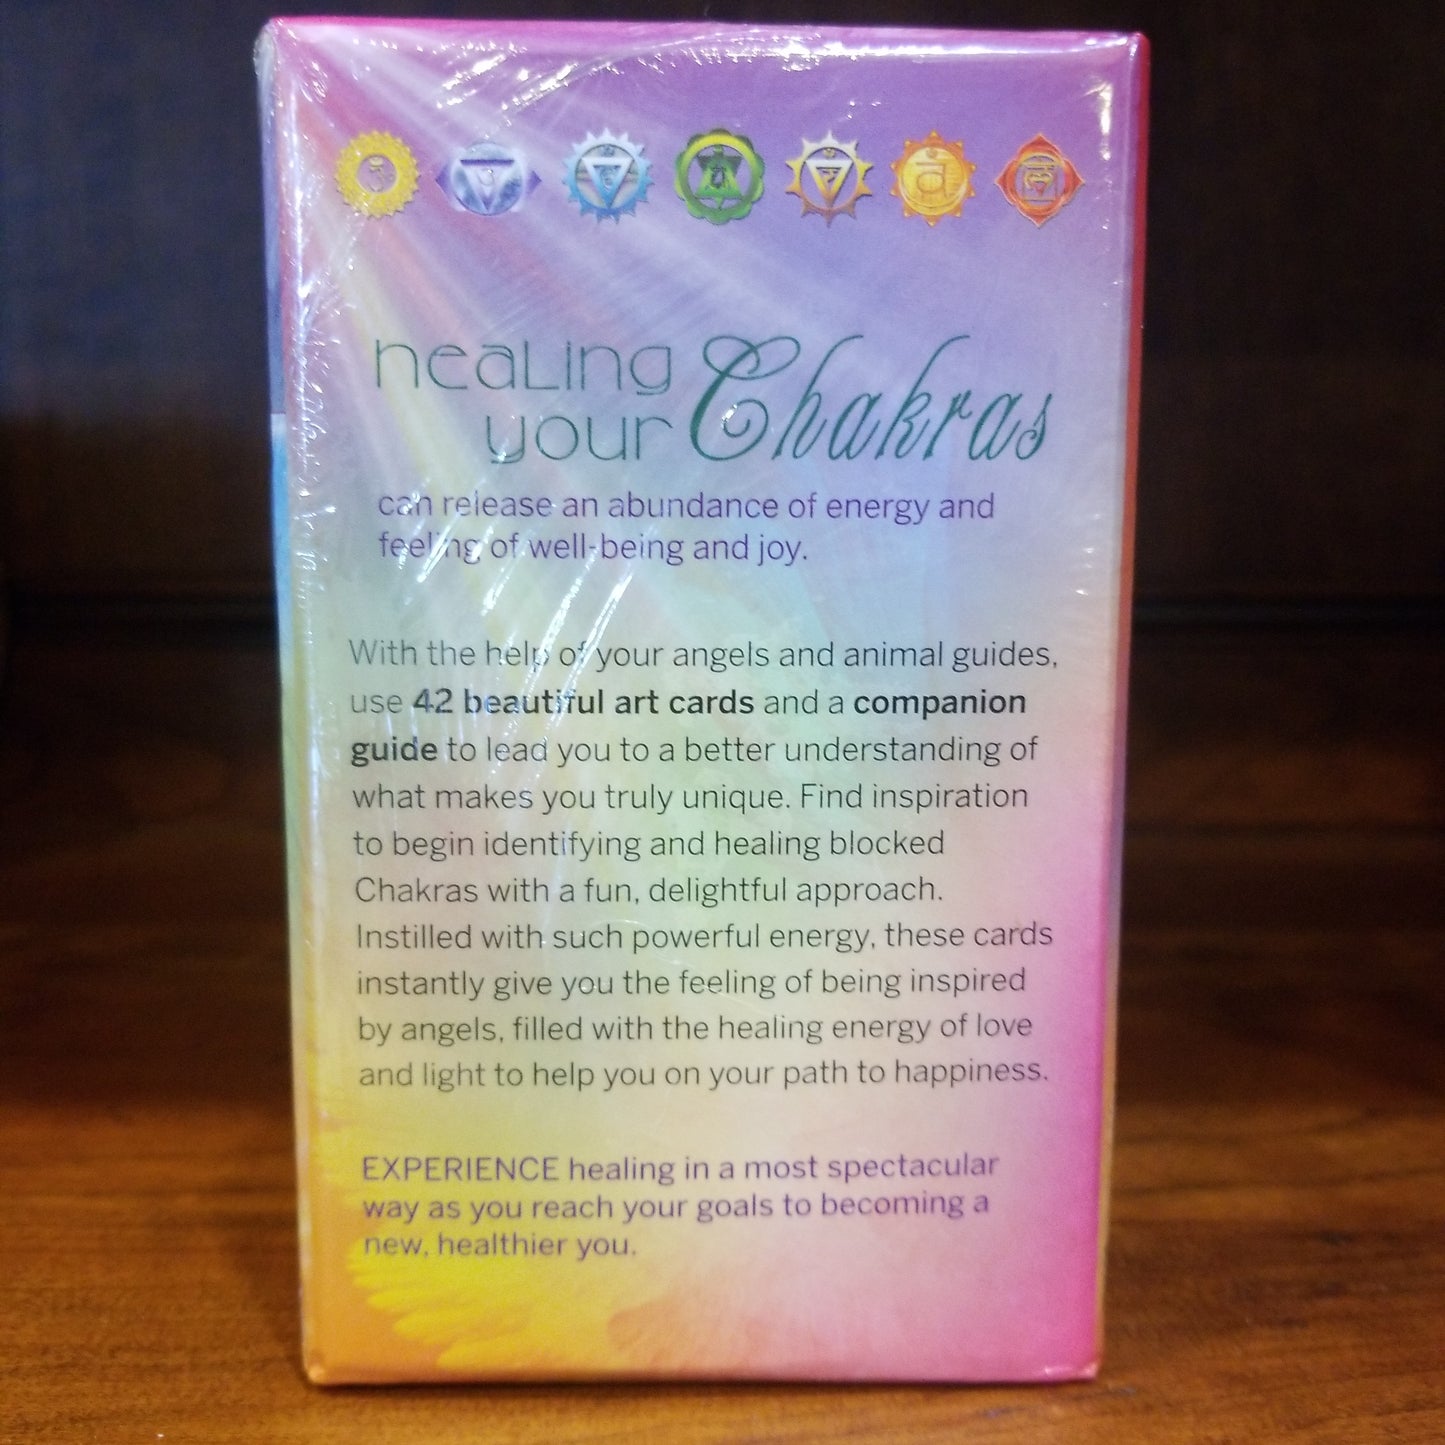 Angel Cards Working with Your Chakras